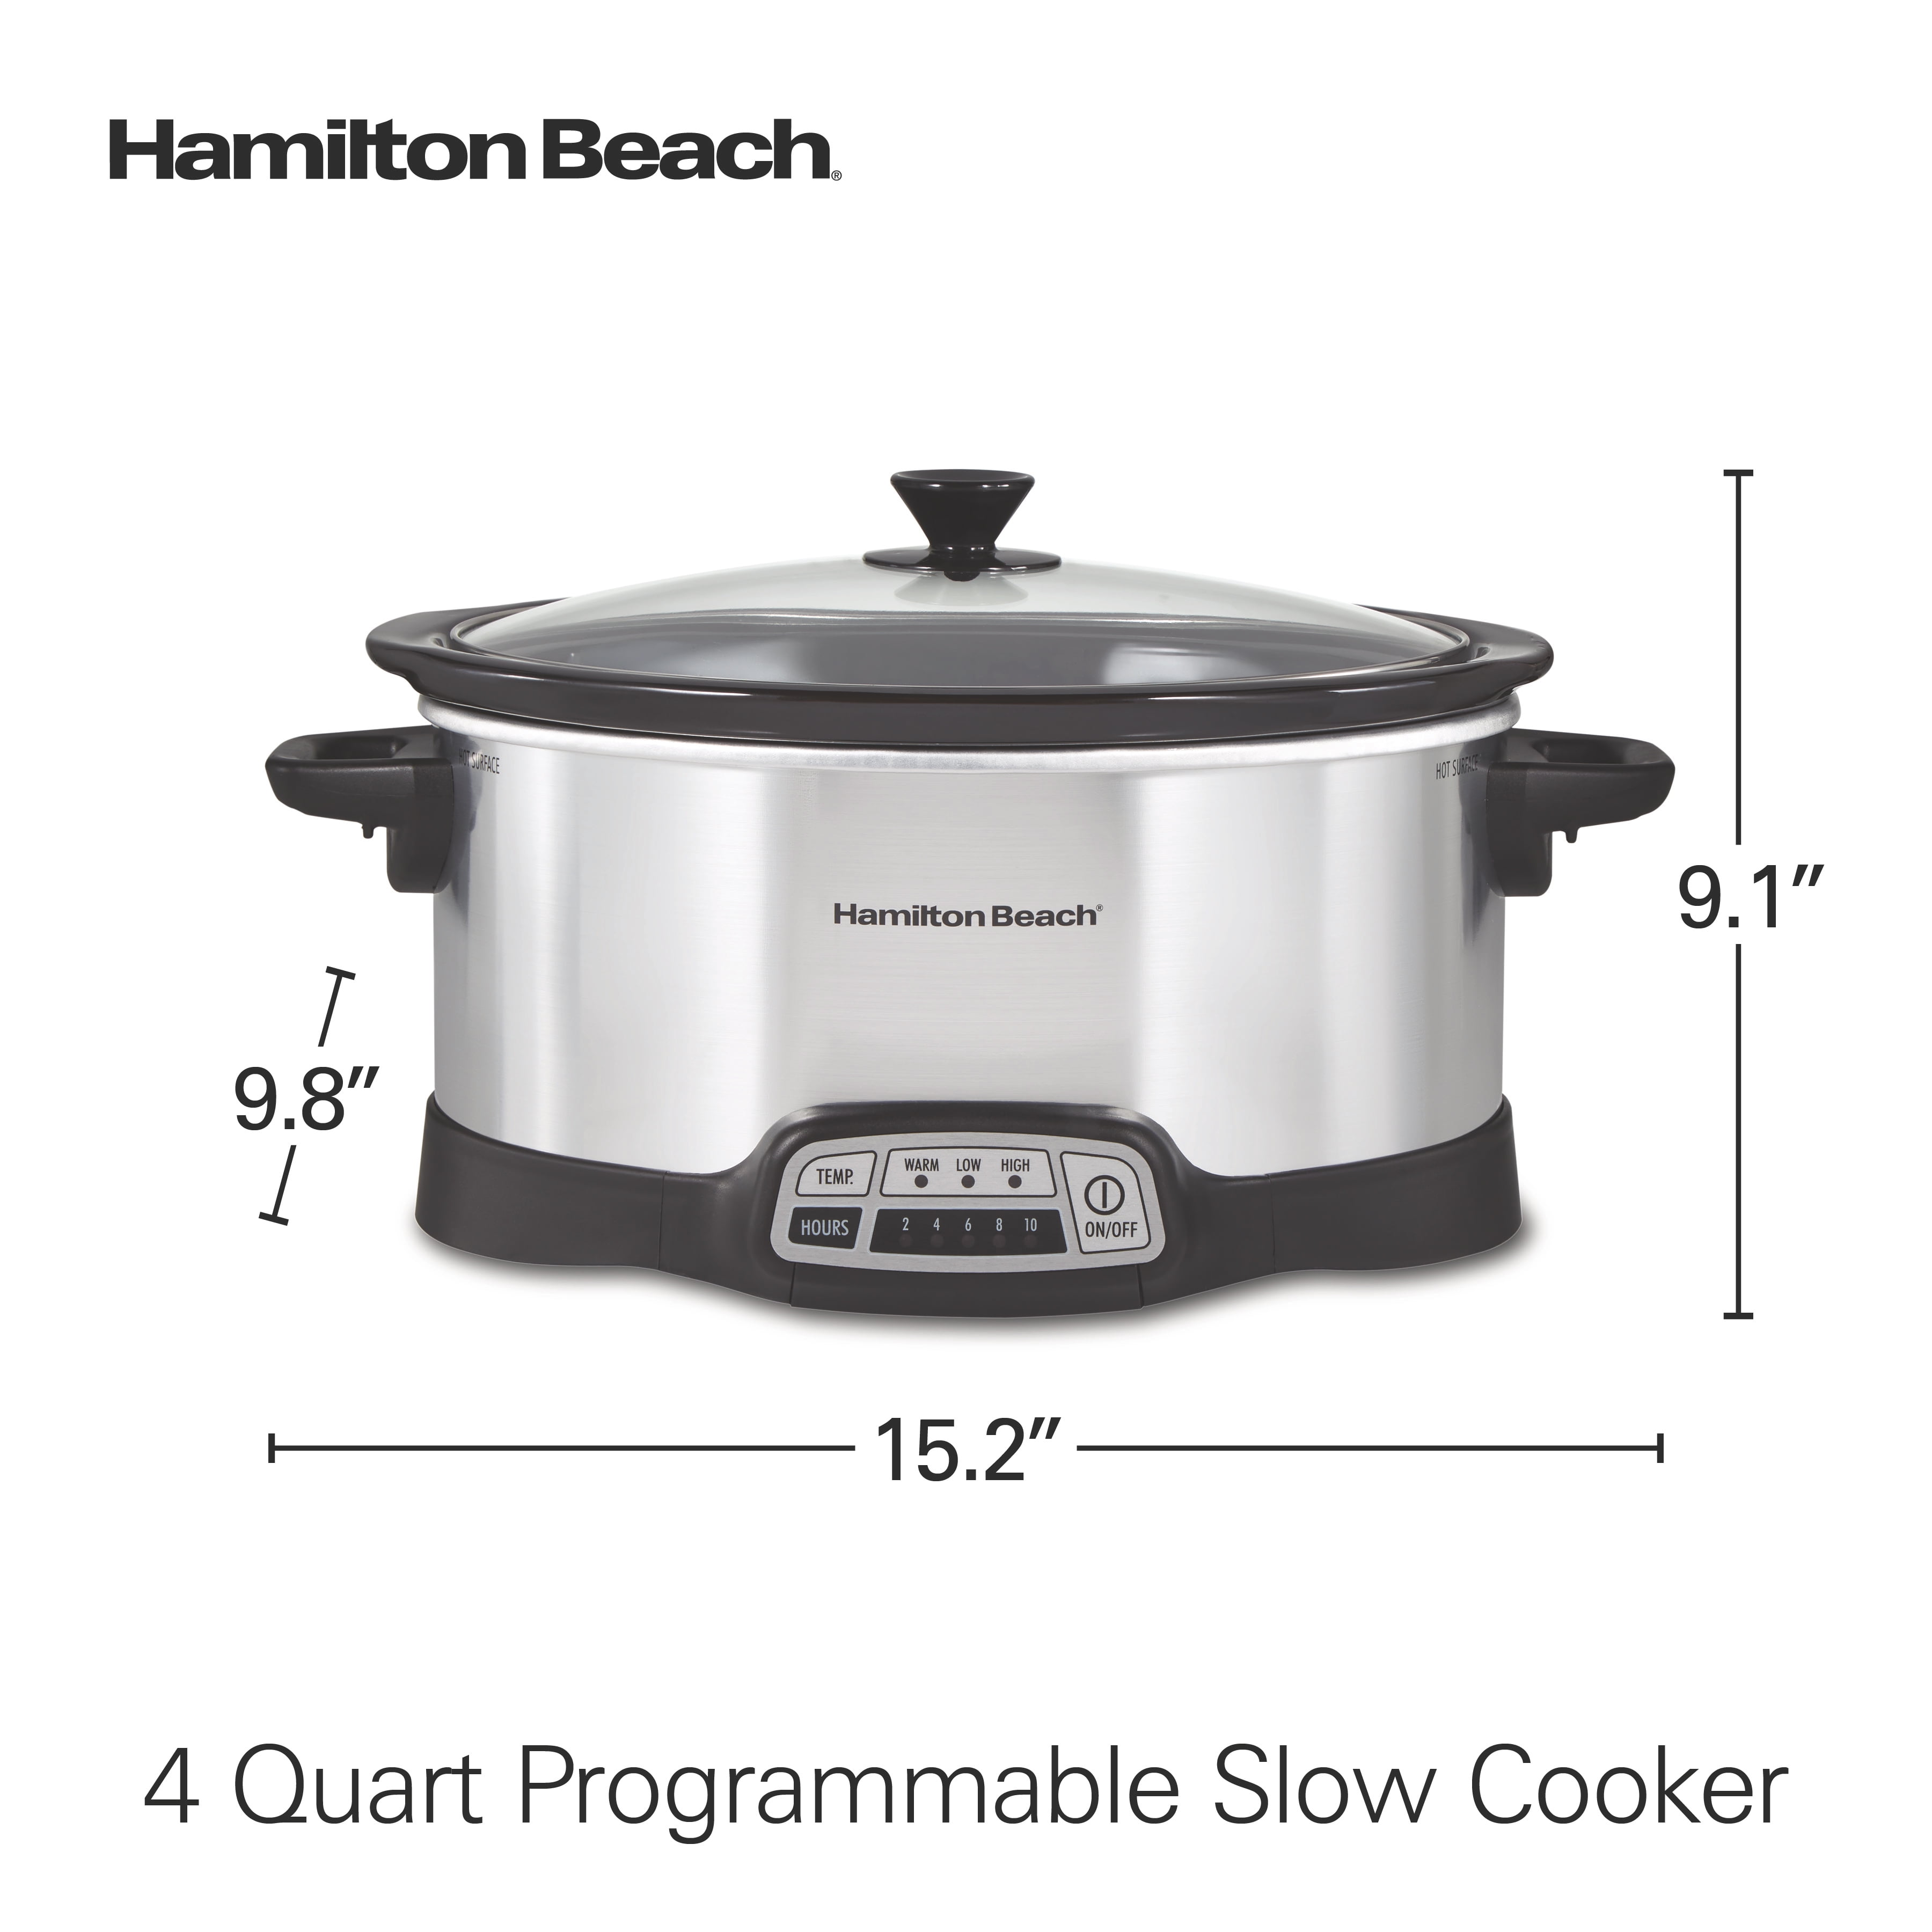  Hamilton Beach 4-Quart Programmable Slow Cooker With